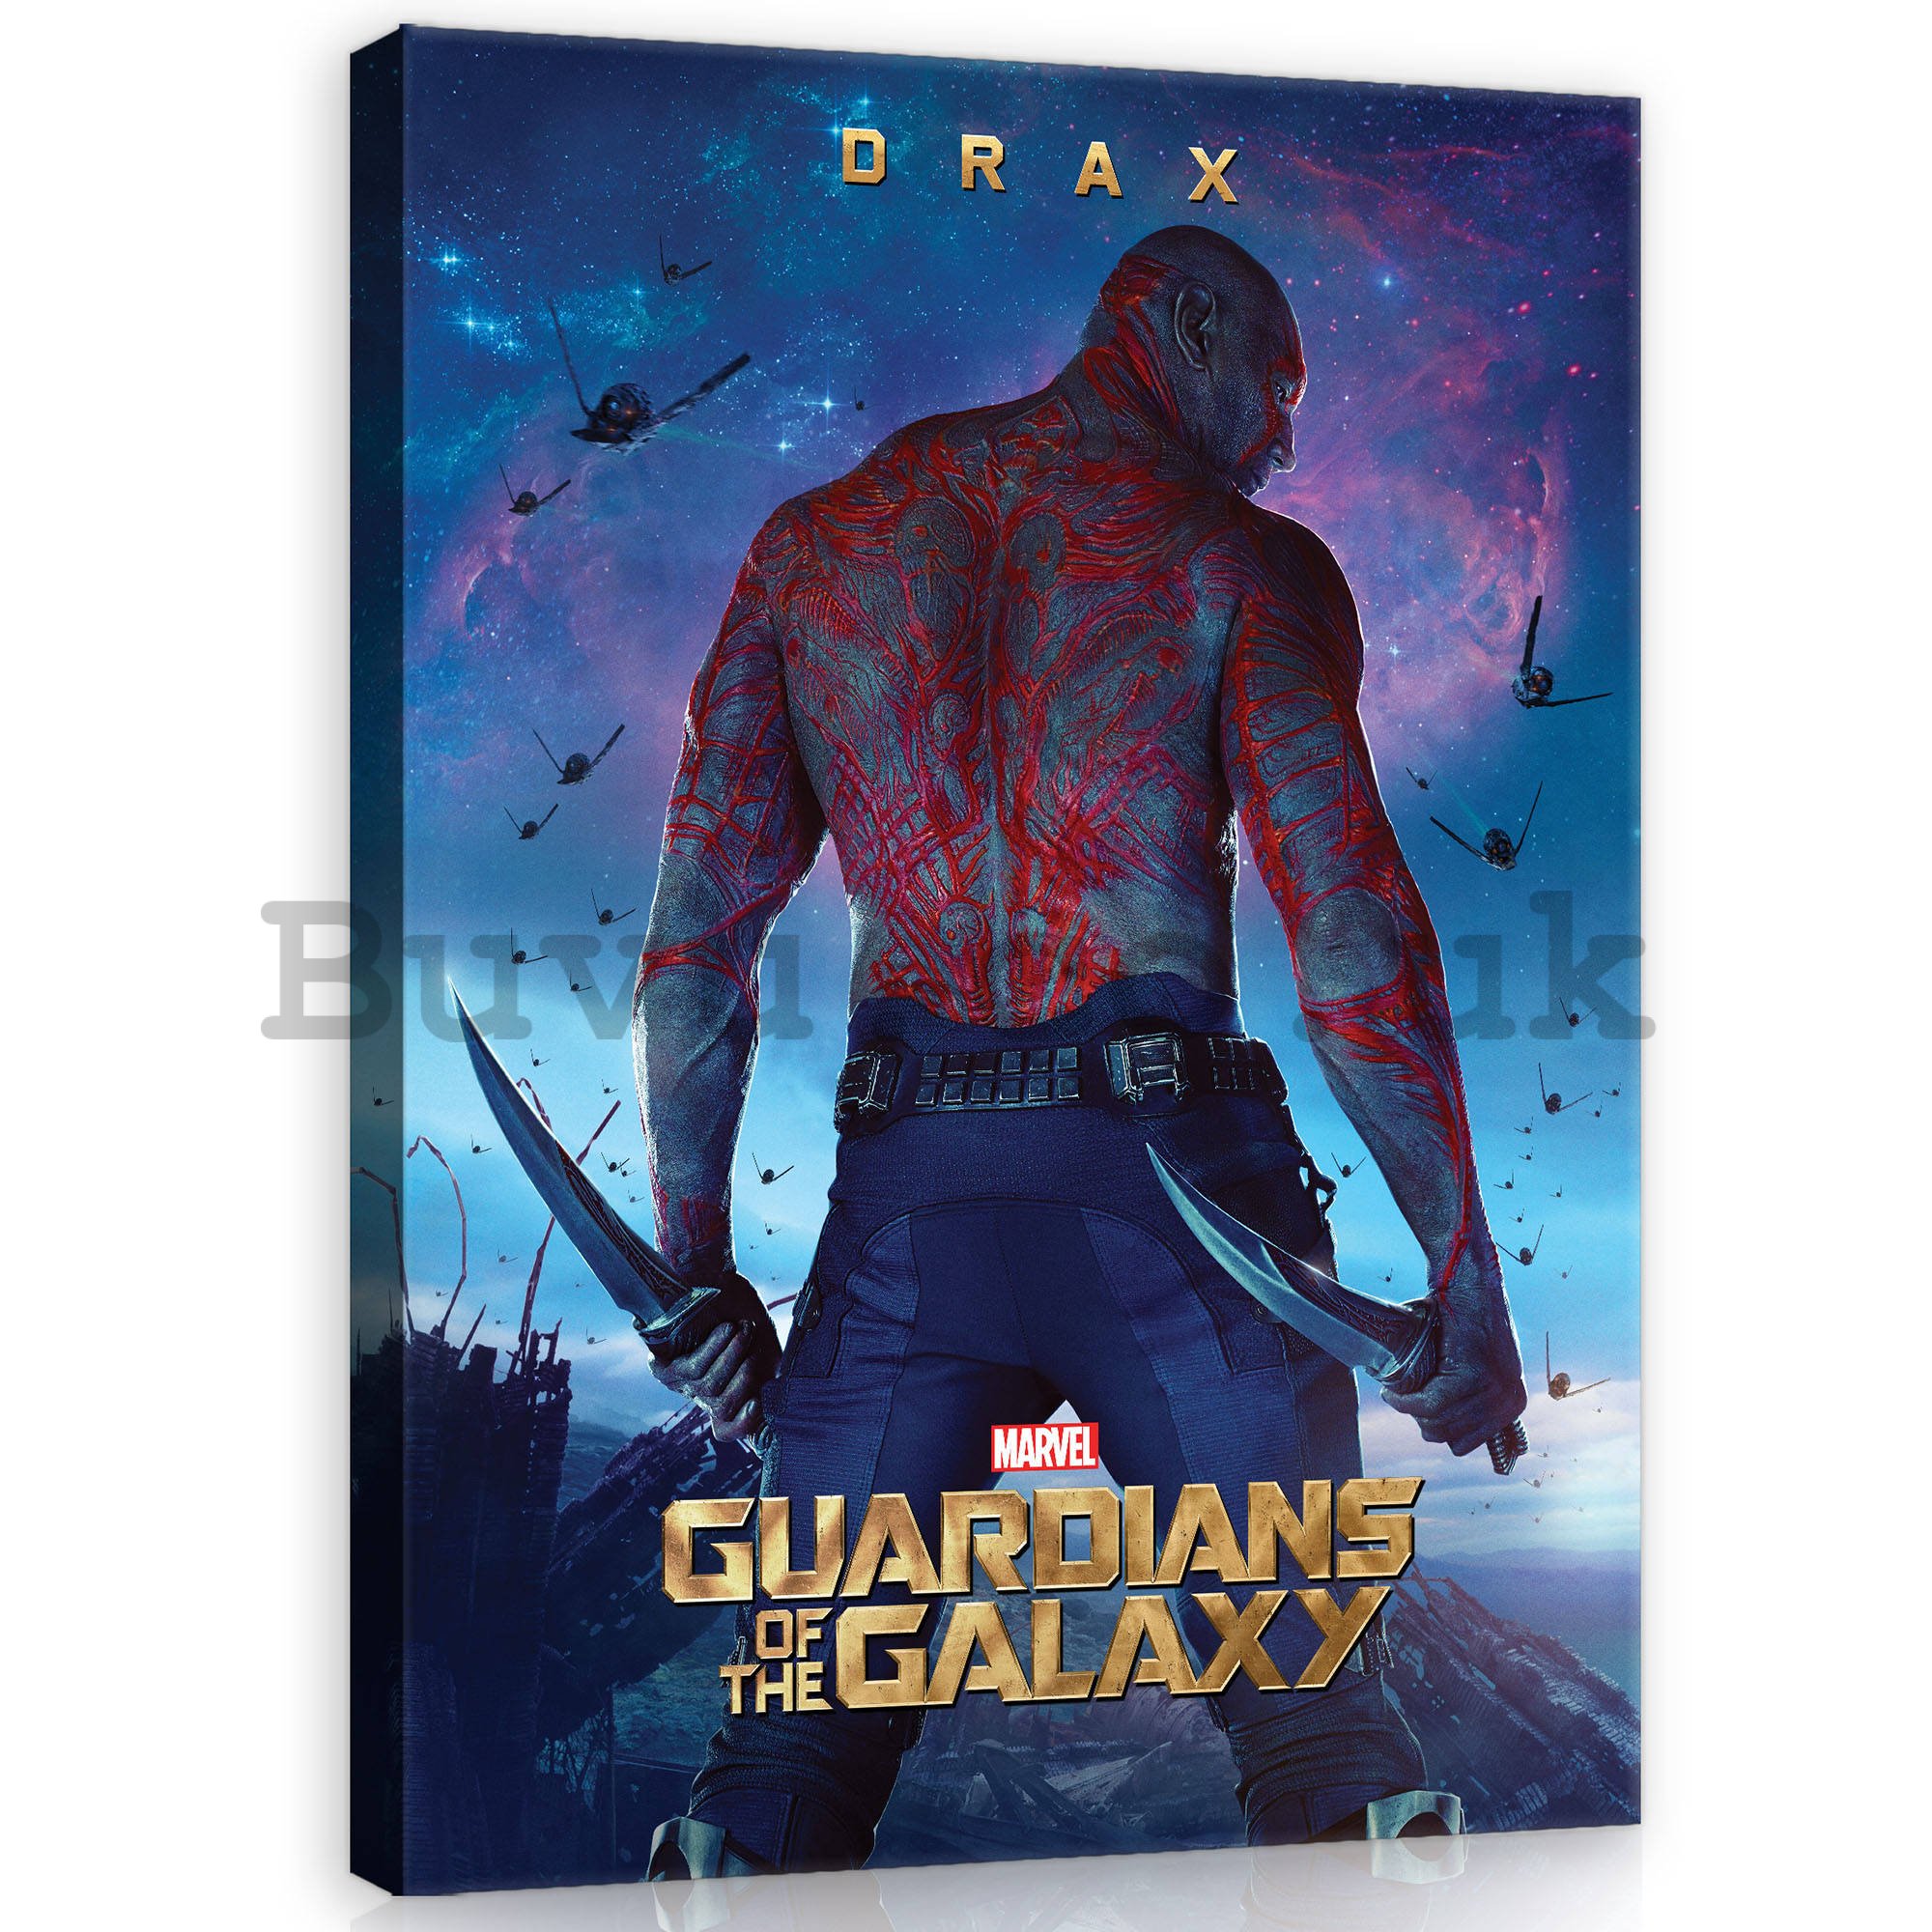 Painting on canvas: Guardians of The Galaxy Drax - 60x80 cm